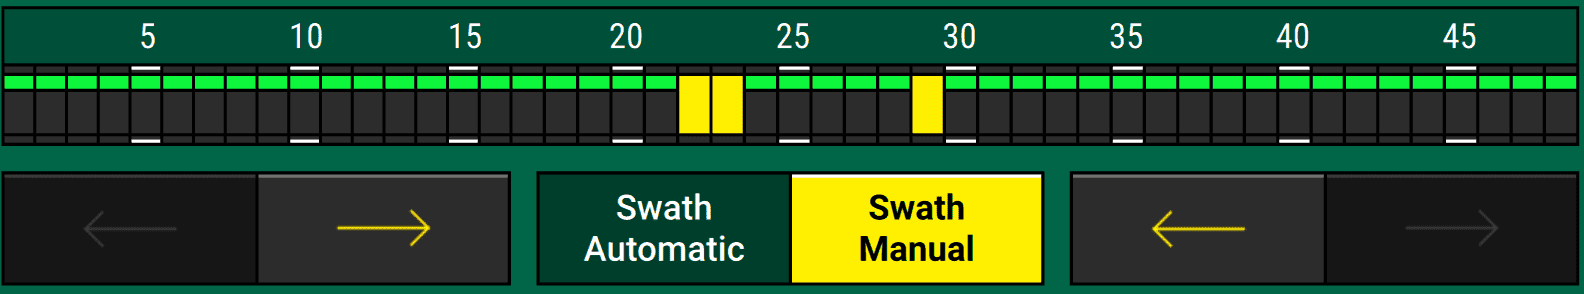 A swath control chart on a system control page, with rows 22, 23, and 29 manually turned off by tapping them